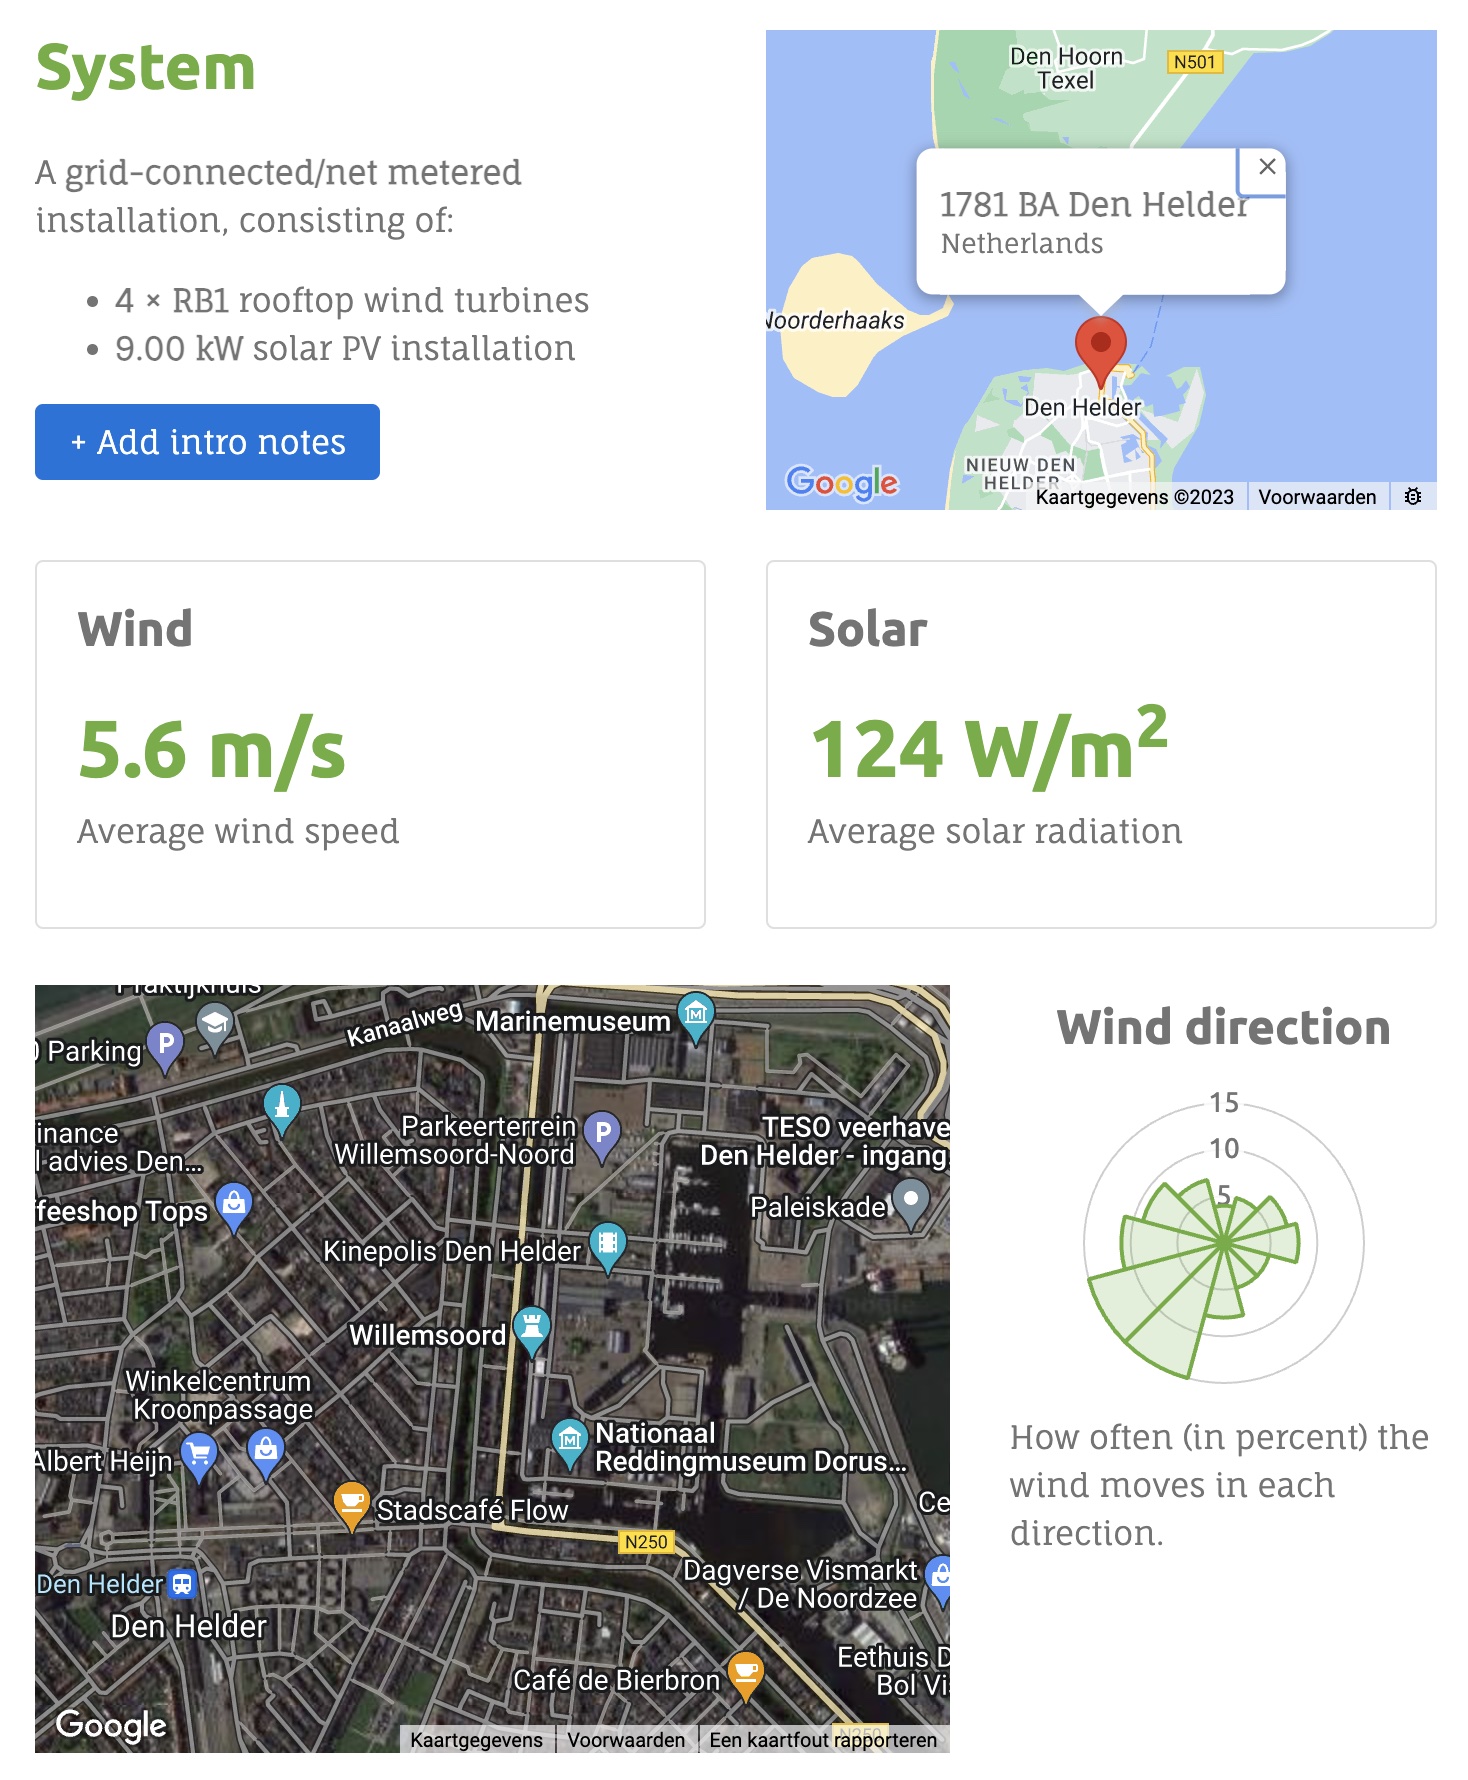 System - a grid-connected/net metered installation, consisting of 4x rooftop wind turbines. 9kW solar PV installation. Average wind speed 5.6m/s solar 124W/m2, Wind direction, how often (in percent) the wind moves in each direction